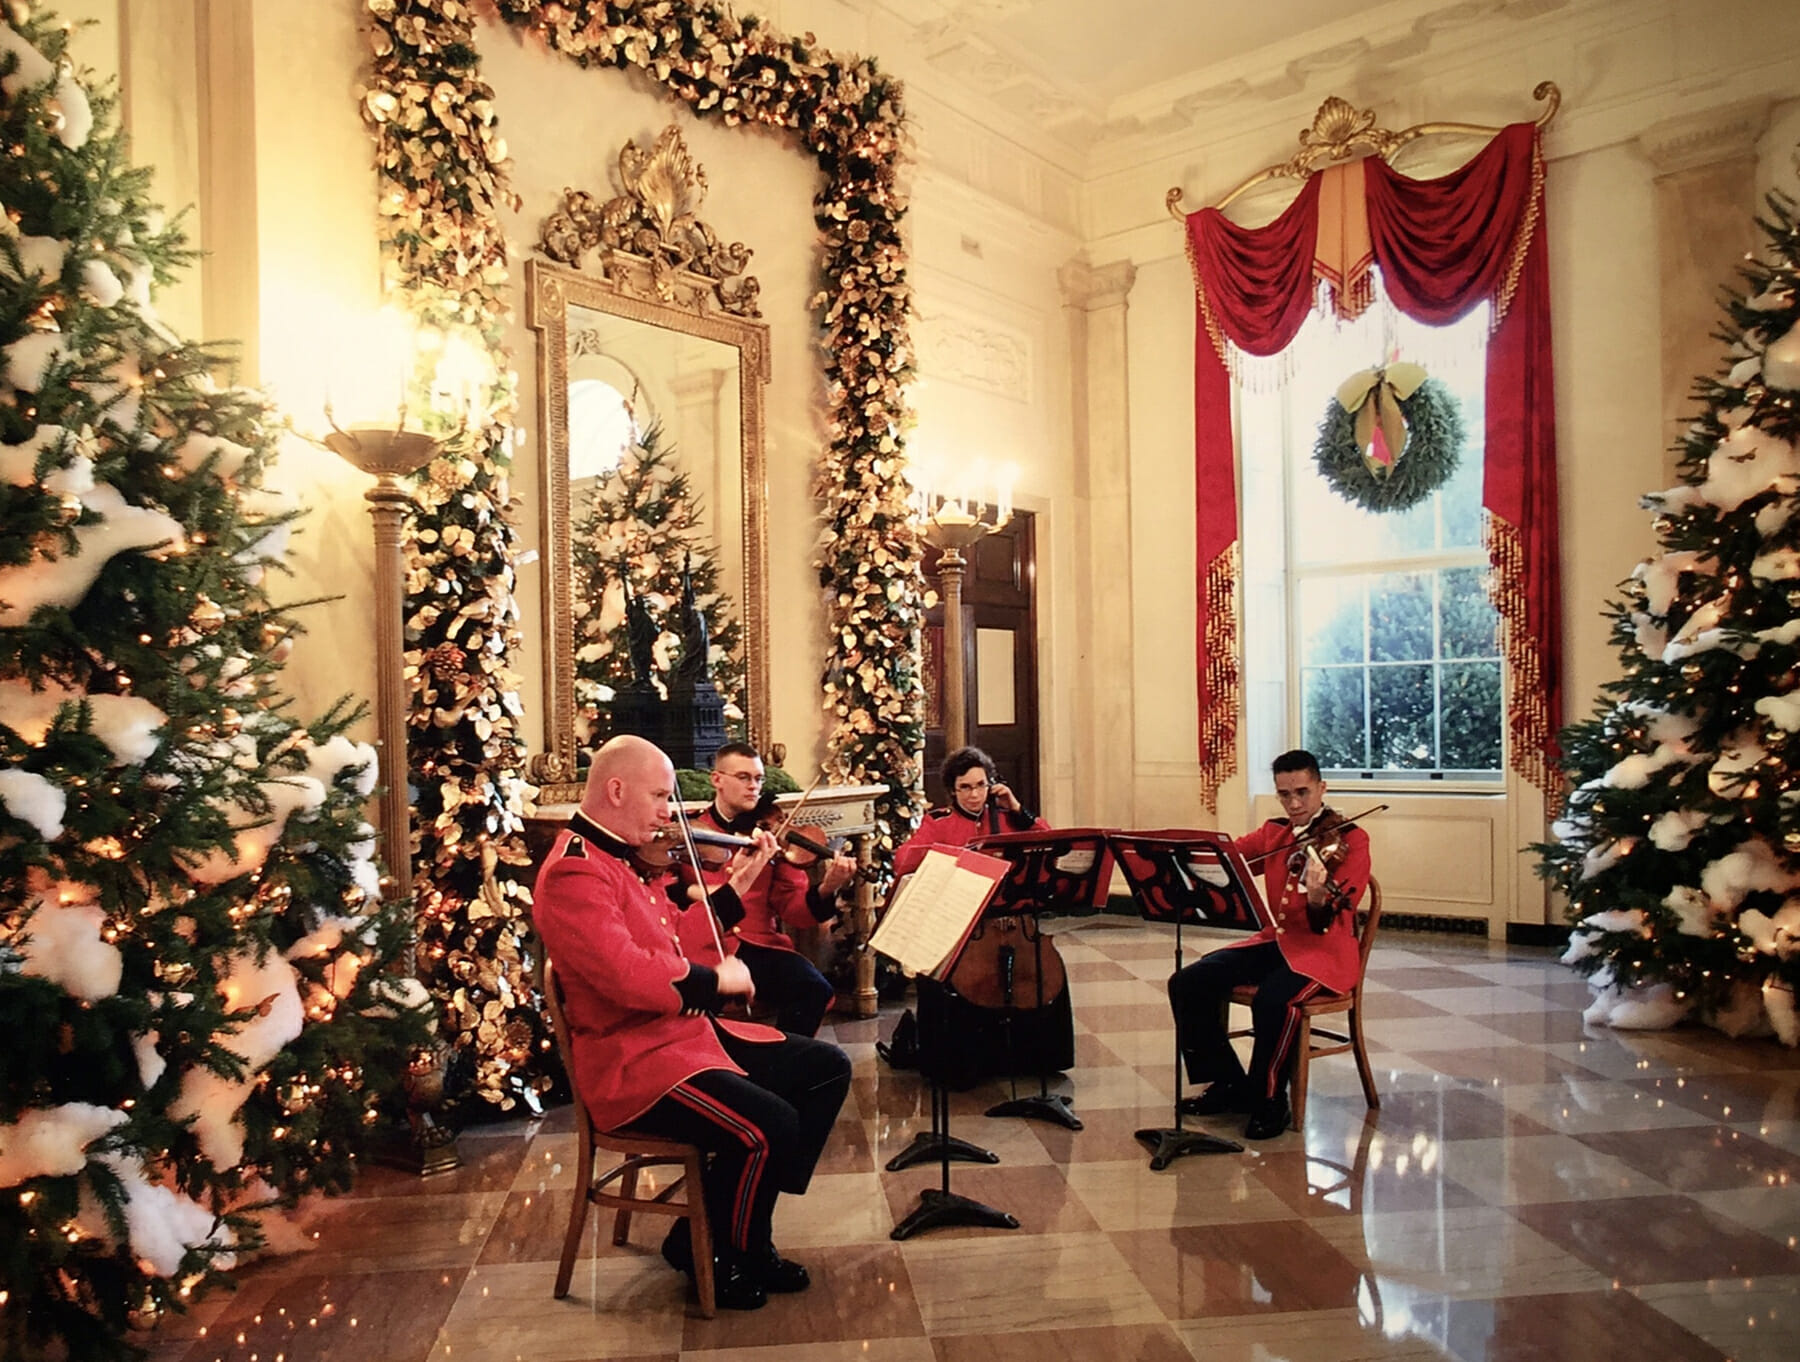 The Grand Foyer of The White House during the Holidays